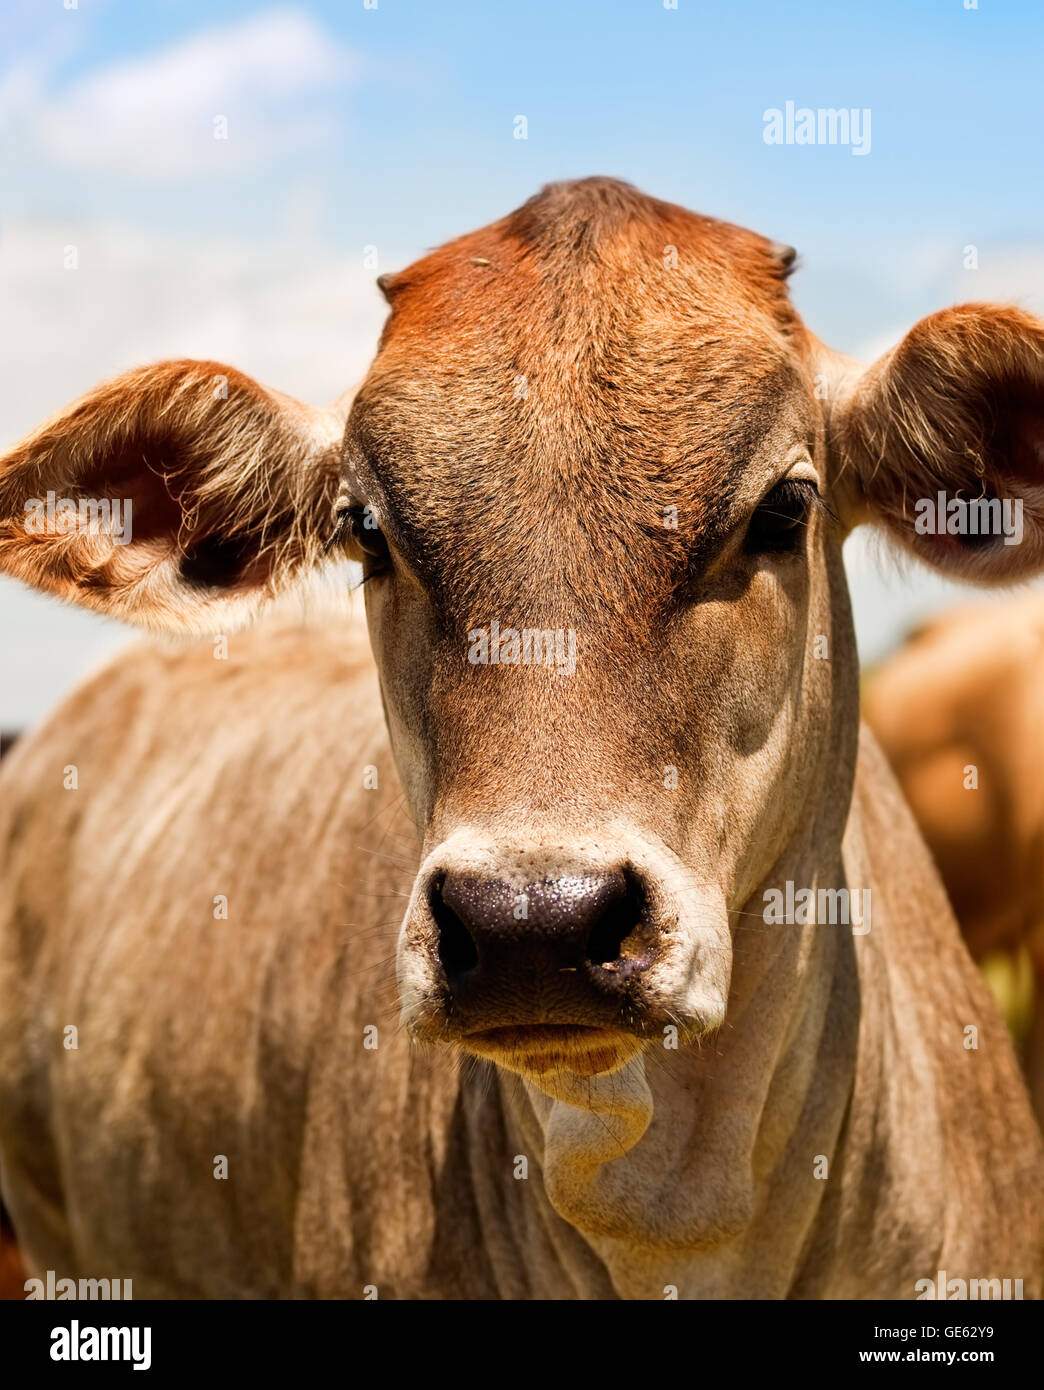 Australian beef cattle young yearling cow portrait against blue sky Stock Photo